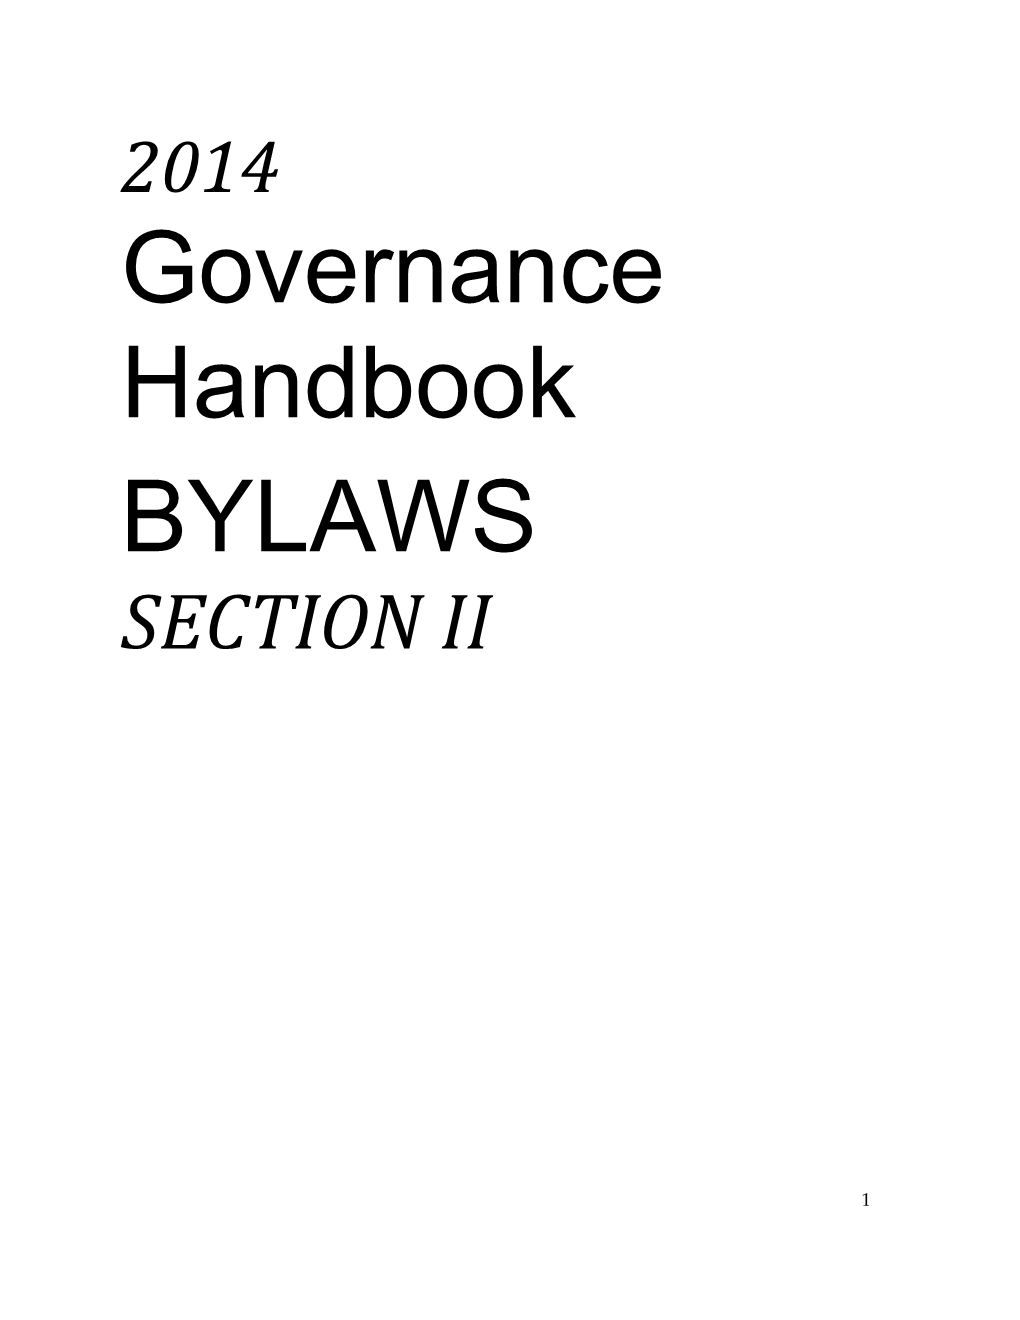 As Used in These Bylaws and the Operating Regulations